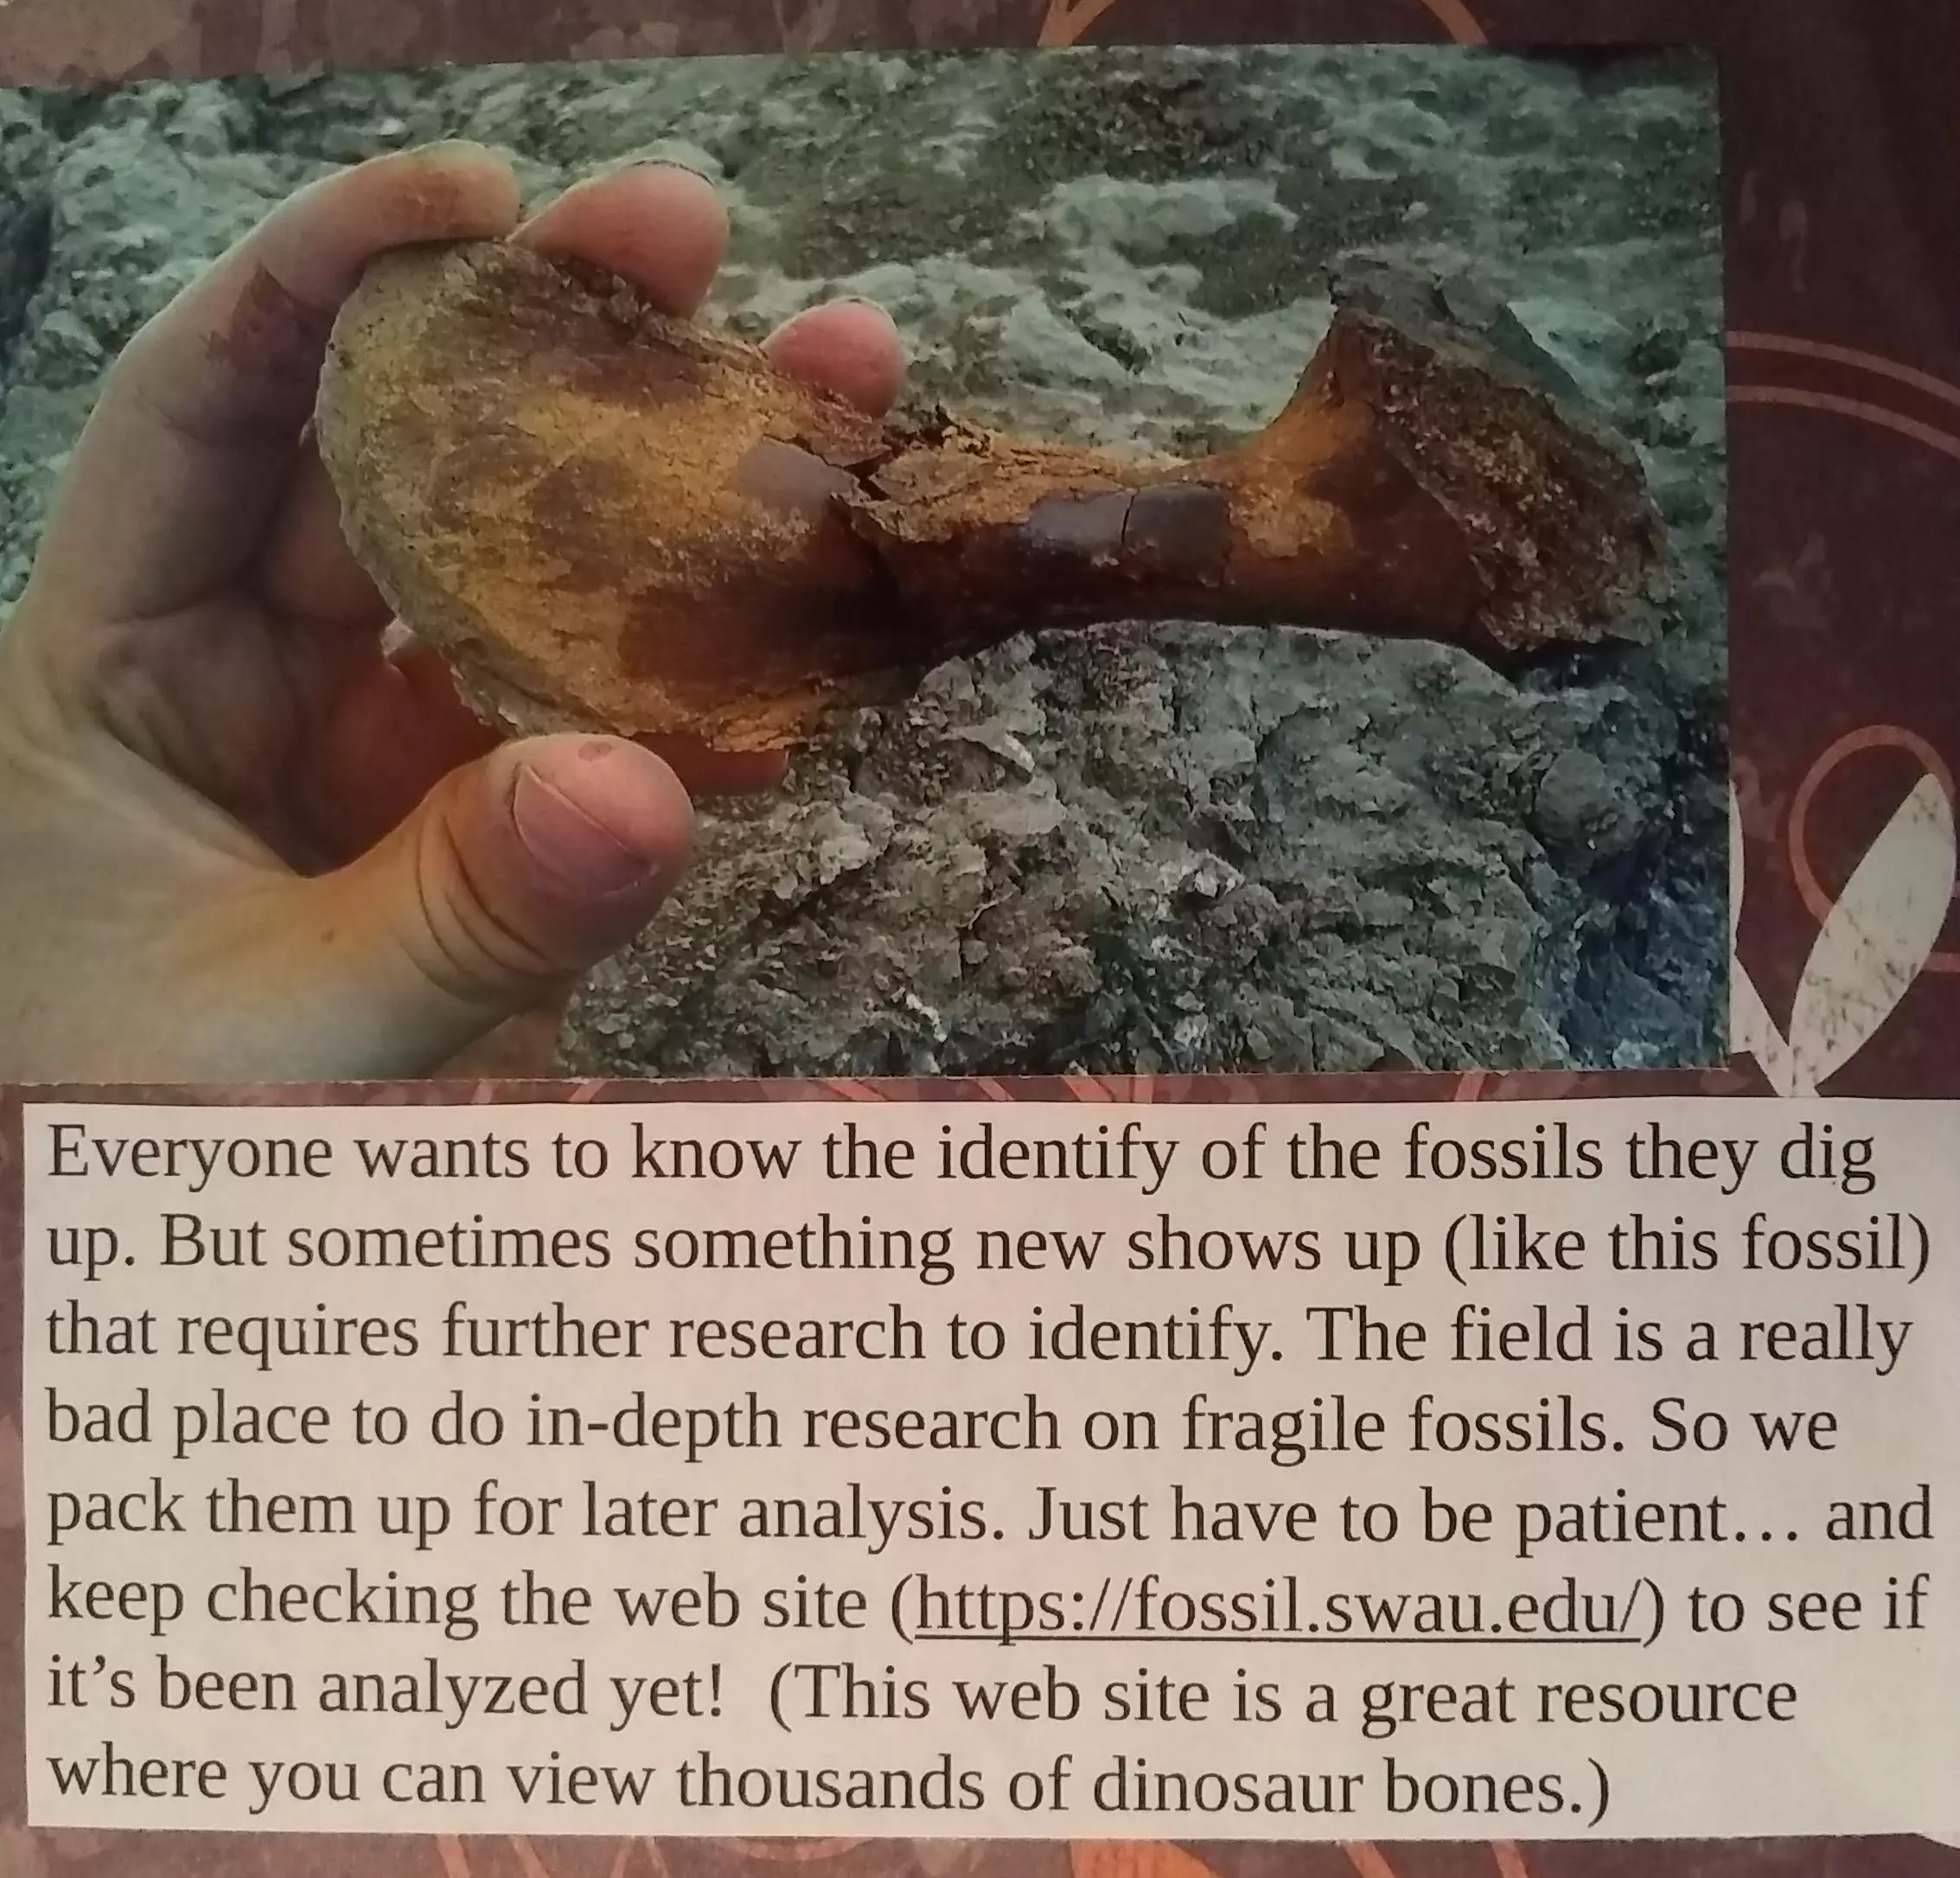 Everyone wants to know the identity of the fossils they dig up. But sometimes something new shows up (like this fossil) that requires further research to identify. The field is a really bad place to do in-depth research on fragile fossils. So we pack them up for later analysis.